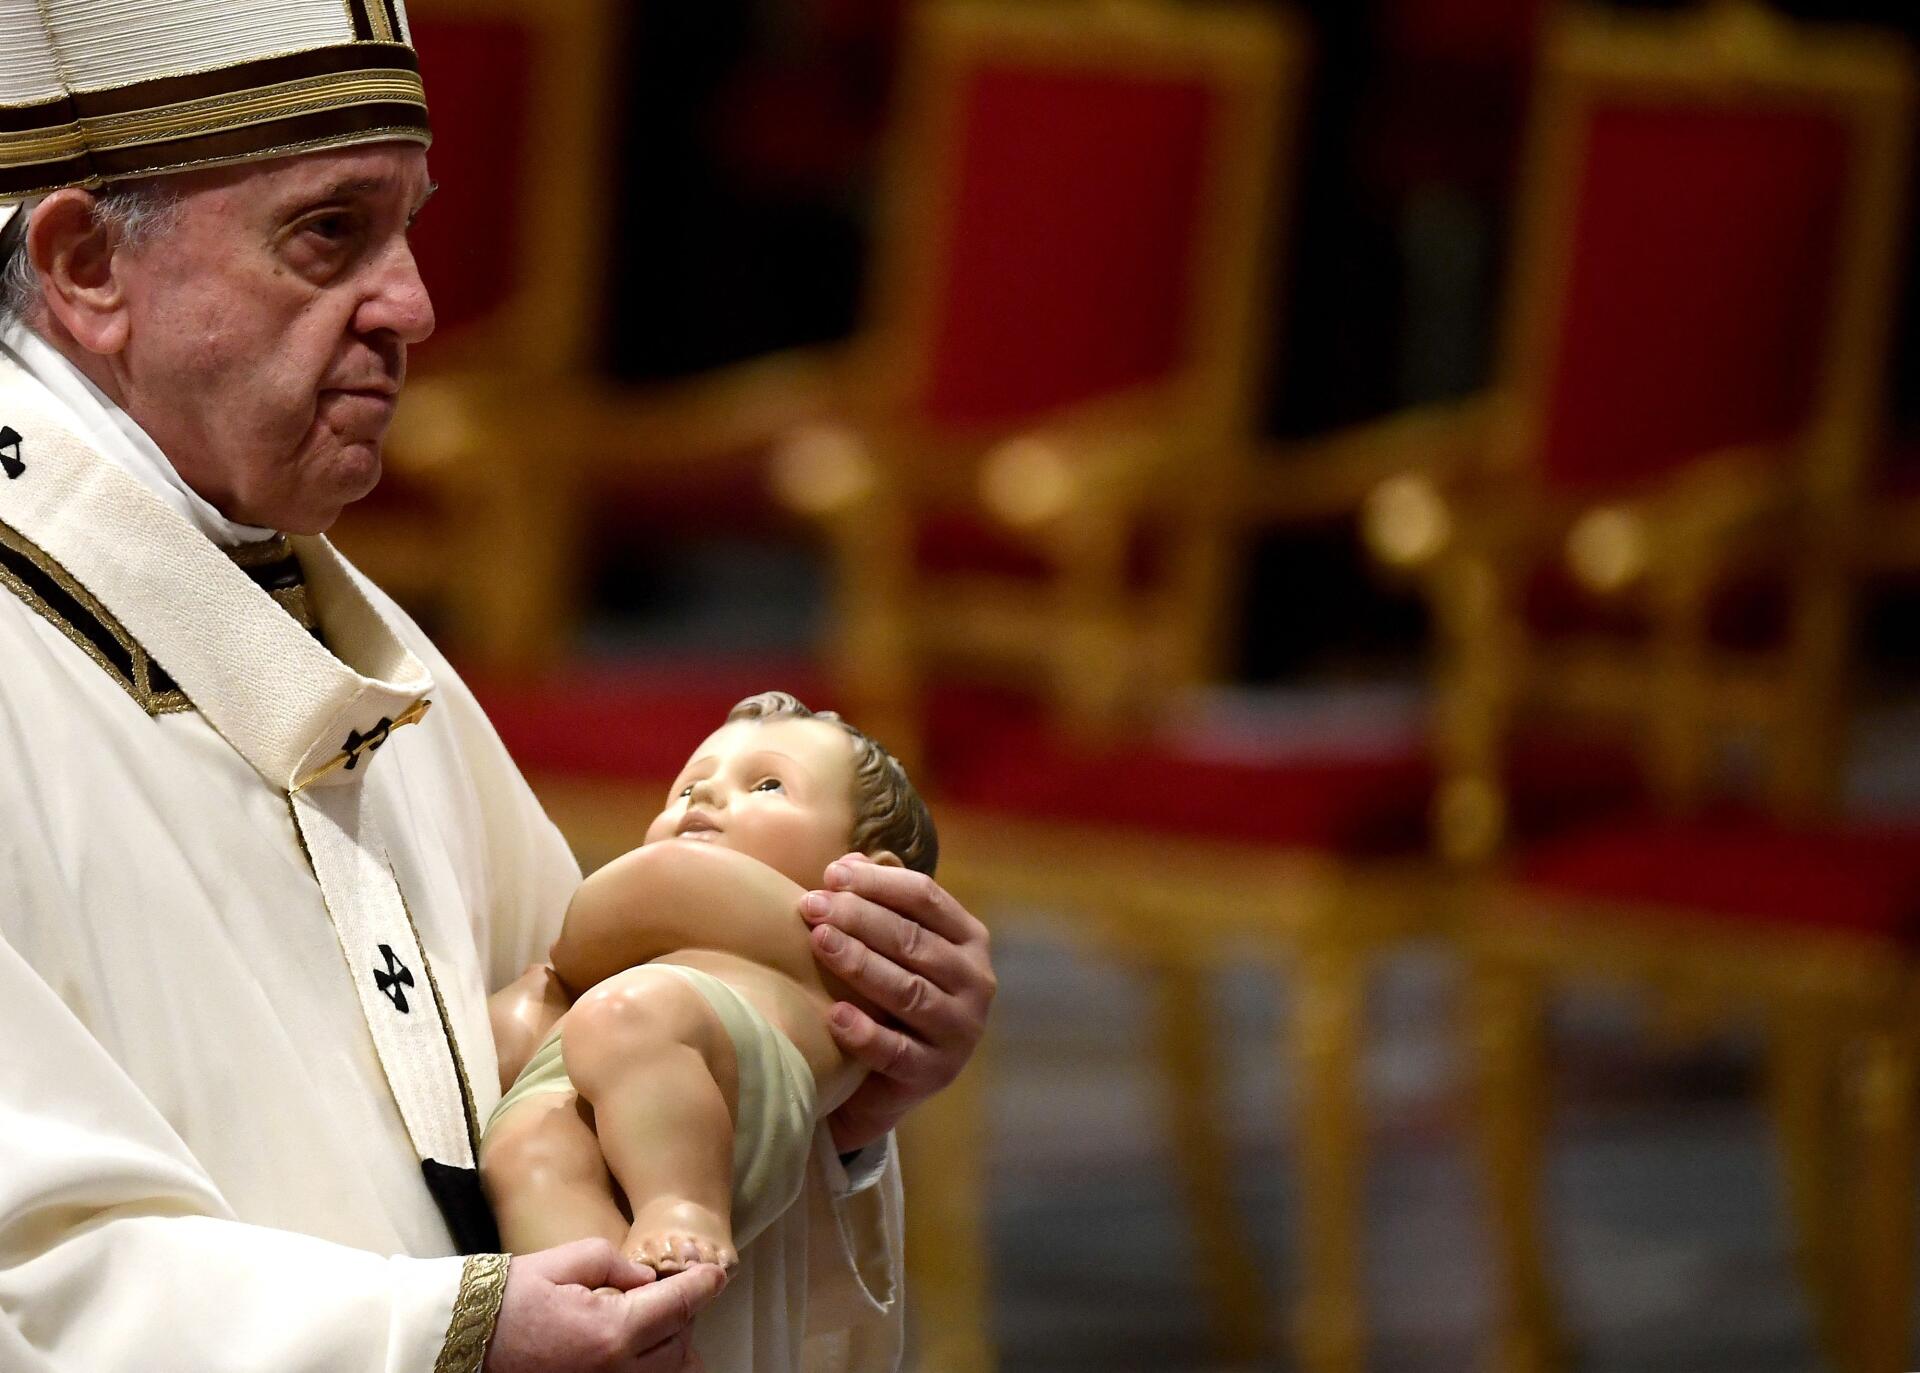 Pope Francis is holding a figurine of the baby Jesus, Friday, December 24, 2021, during the New Year's Eve mass in Saint Peter's in Rome.